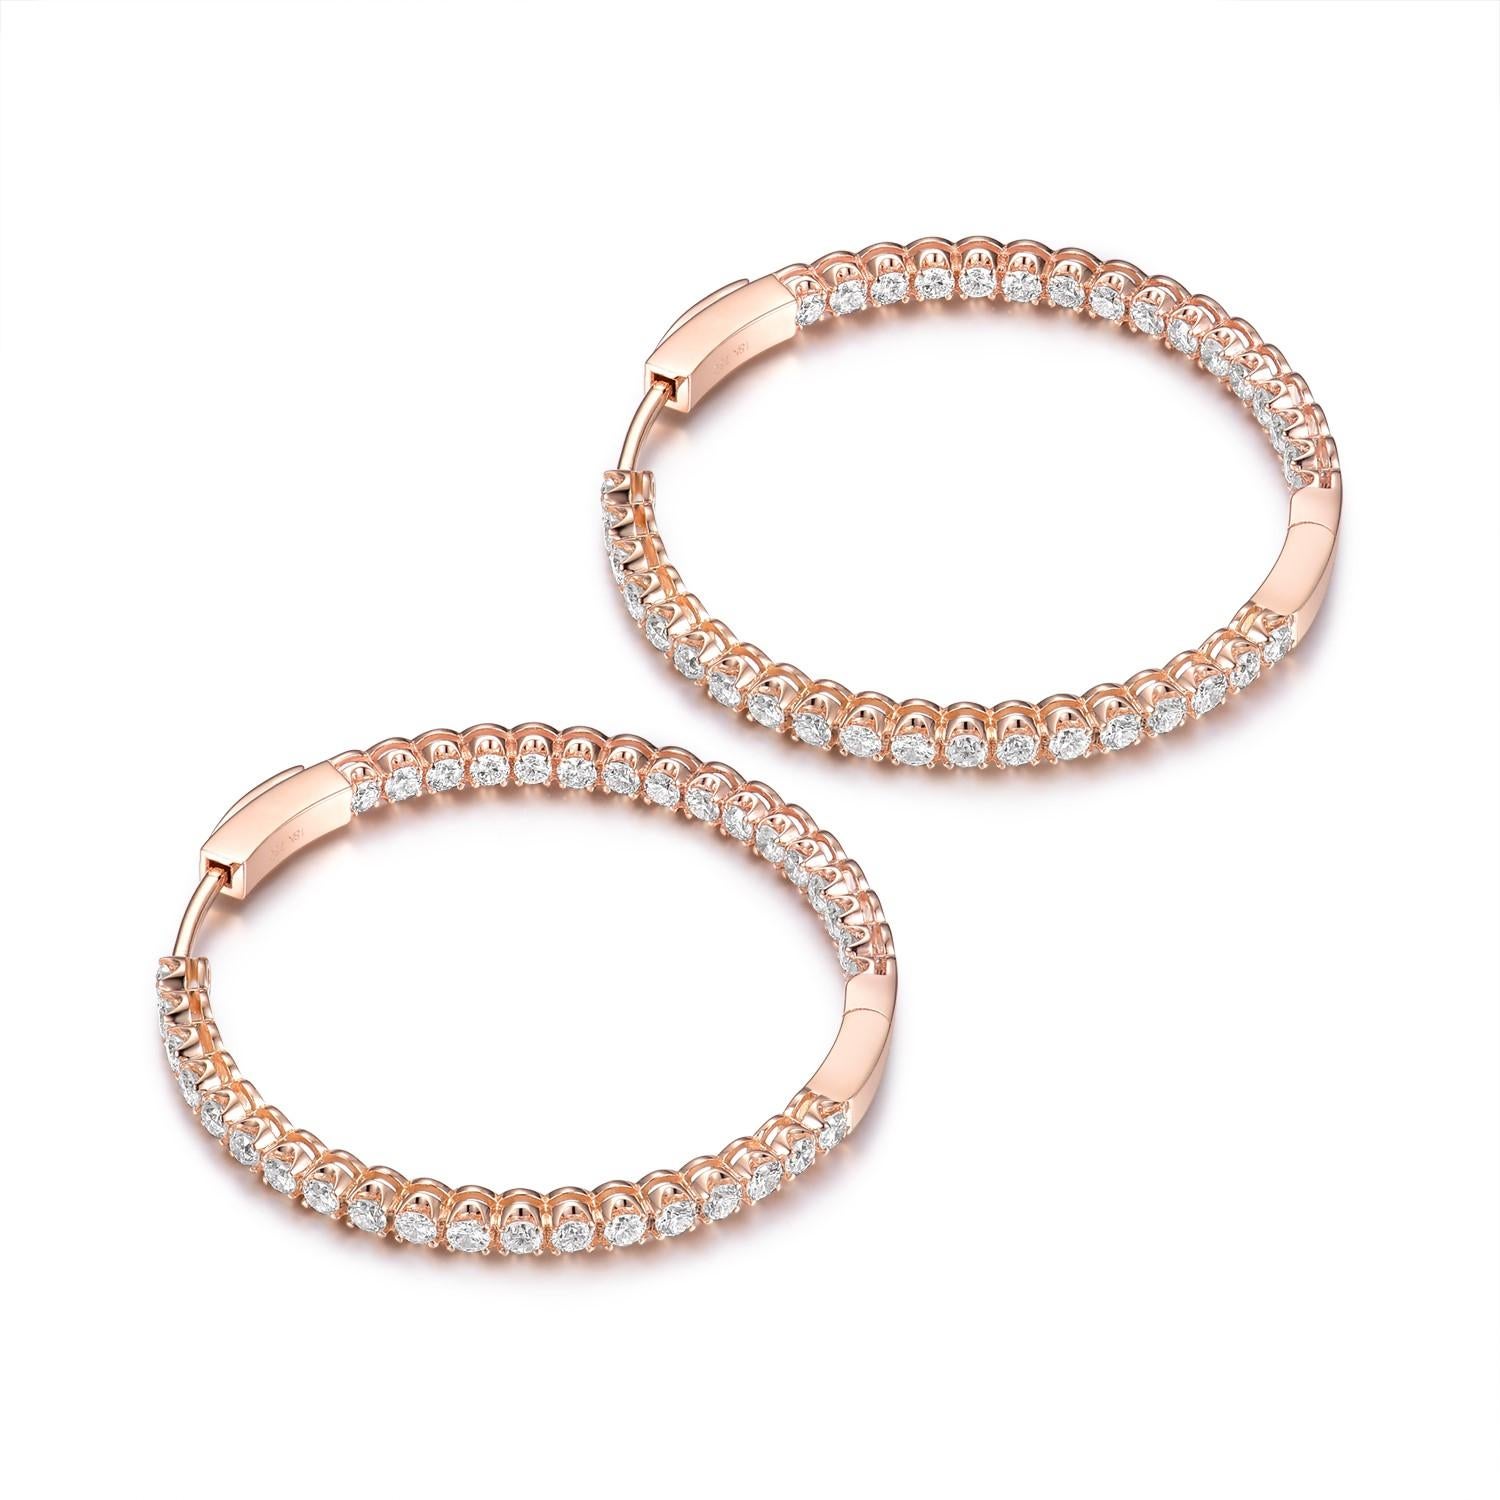 Embrace timeless elegance with our 2.10 Total Carat Diamond Hoop Earrings set in 18 Karat Rose Gold. These stunning earrings seamlessly blend the ageless allure of diamonds with the modern sophistication of rose gold, making them a perfect addition